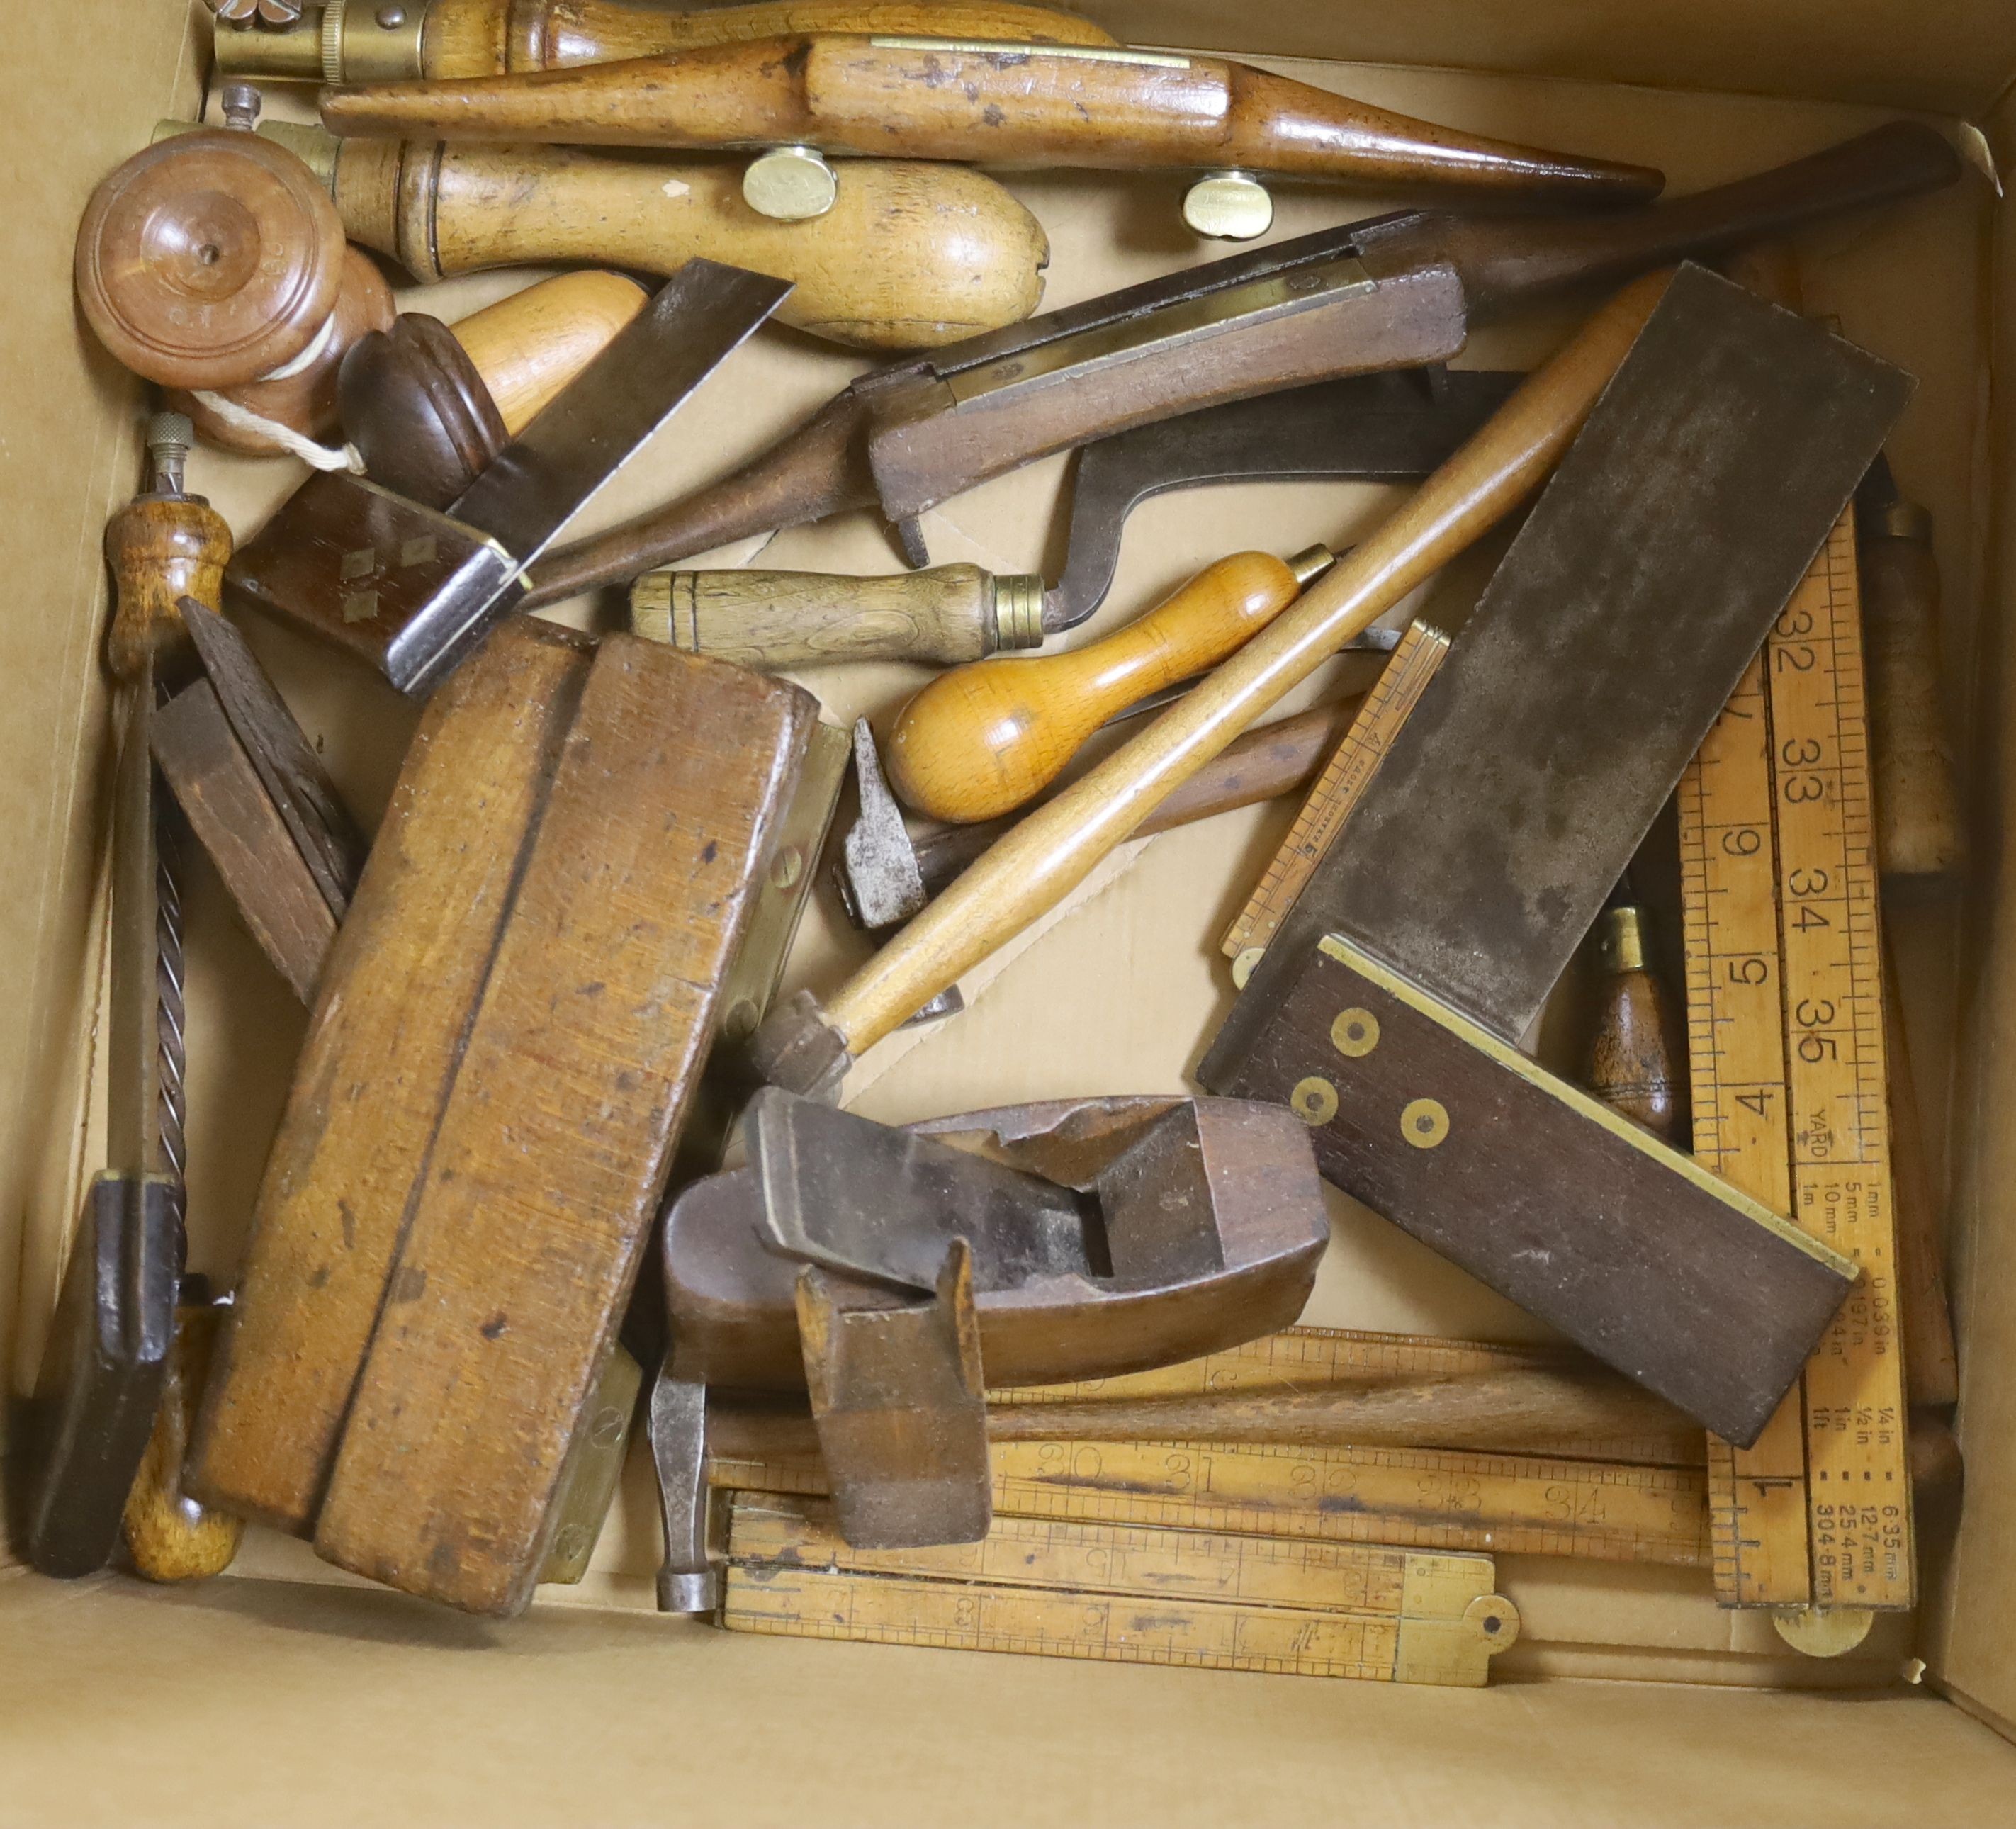 Carpenters tools: brass and mahogany set squares, rulers, small hammers etc.